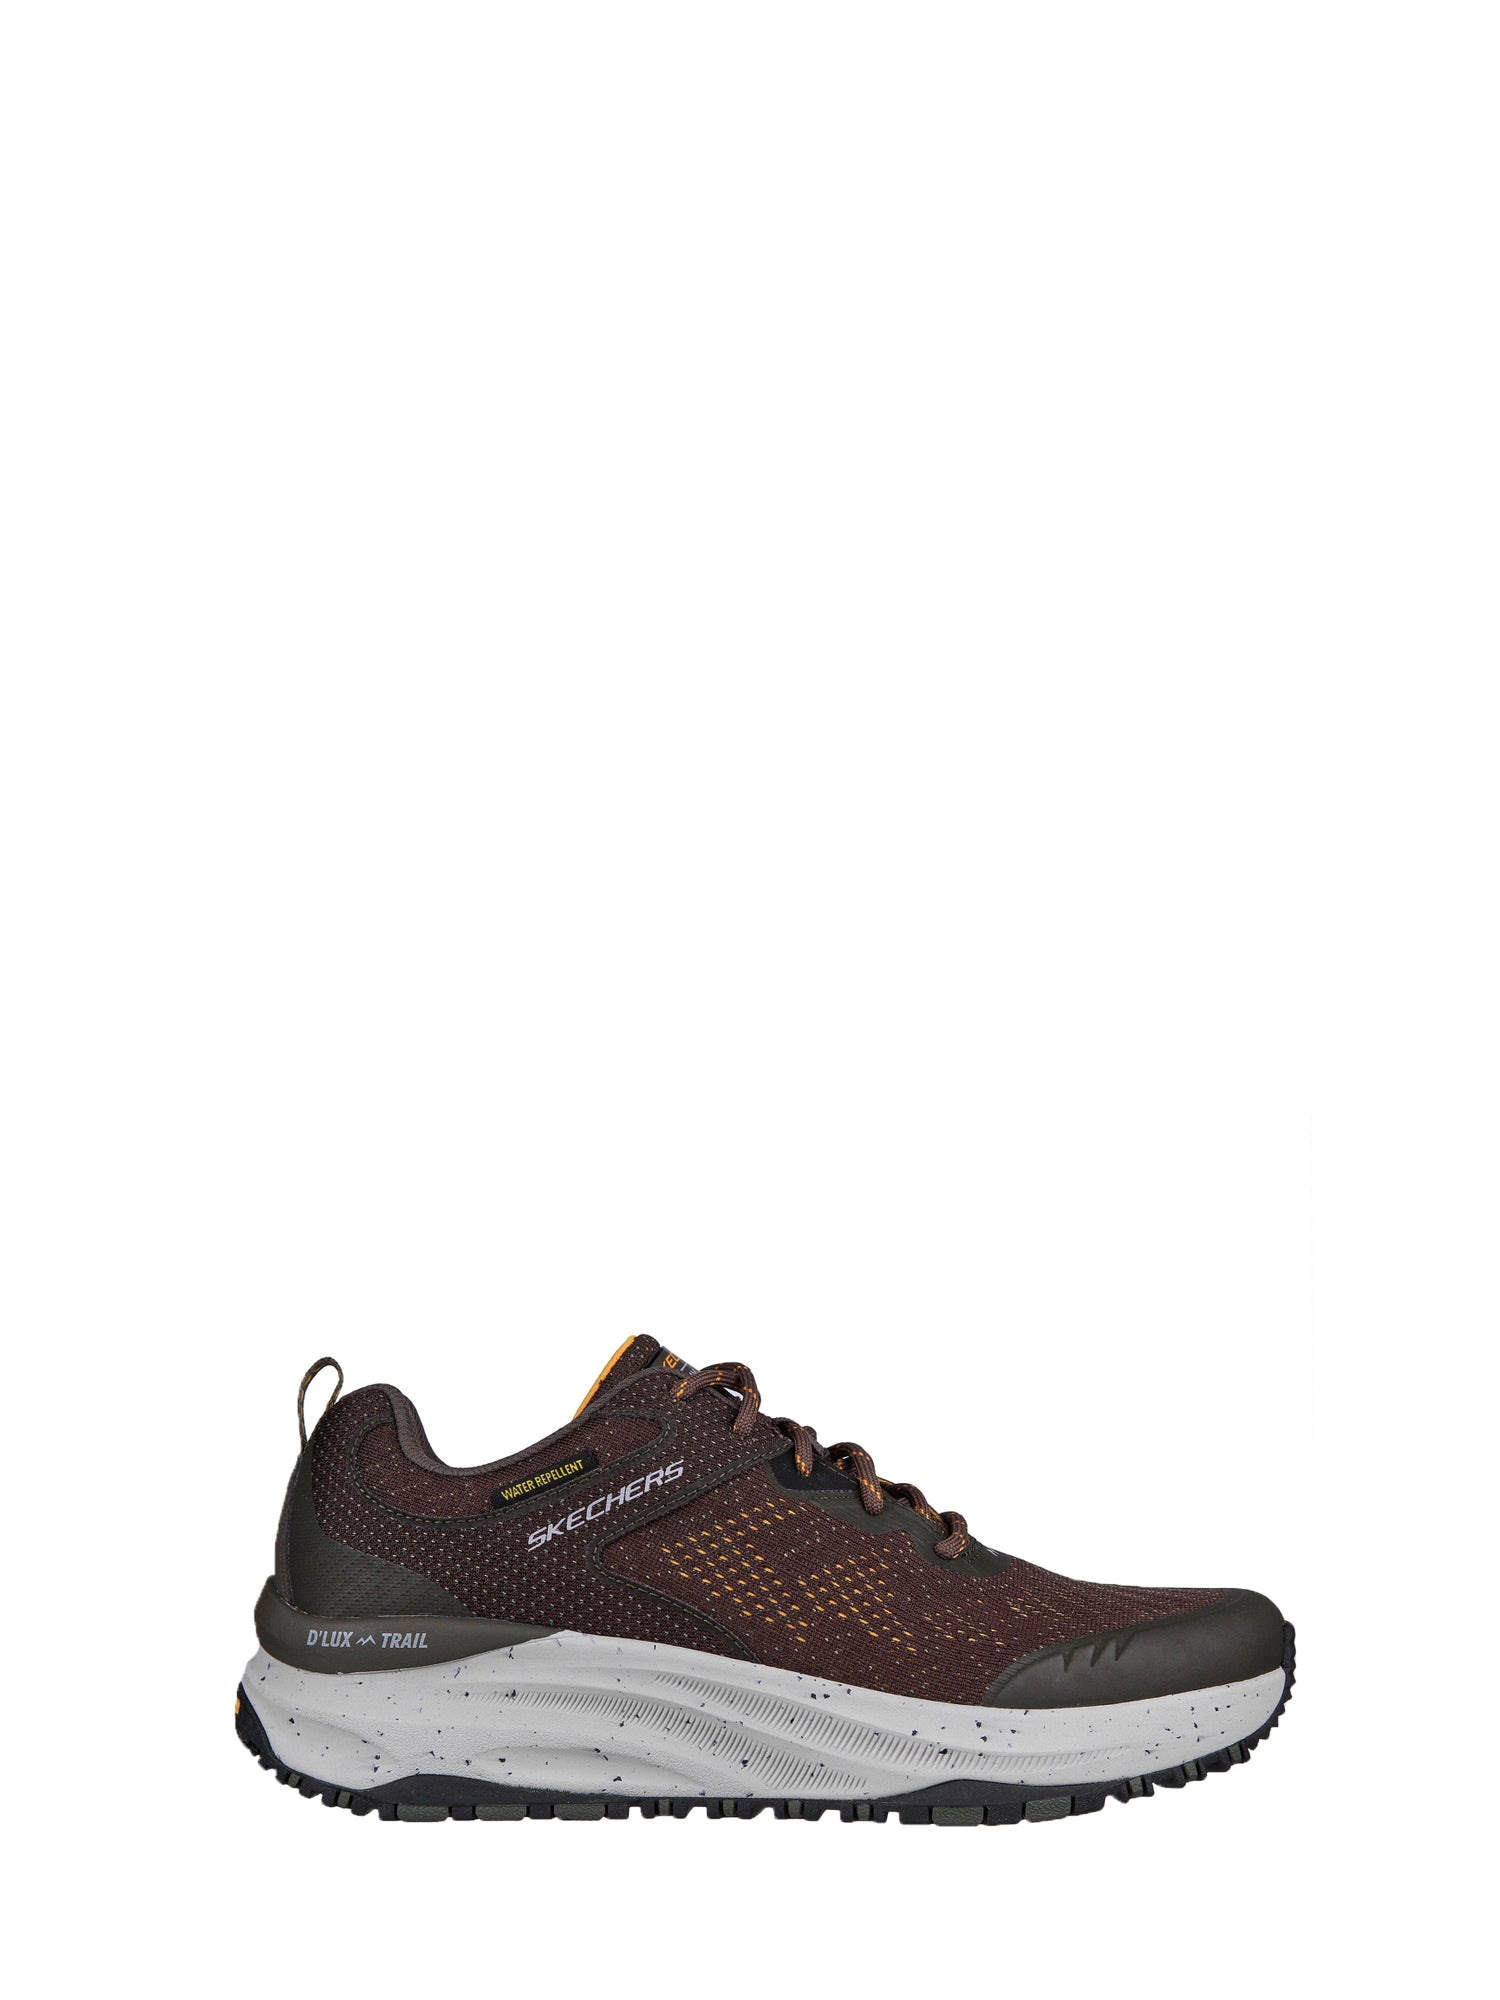 SKECHERS SNEAKERS RELAXED FIT - D'LUX TRAIL OLIVA